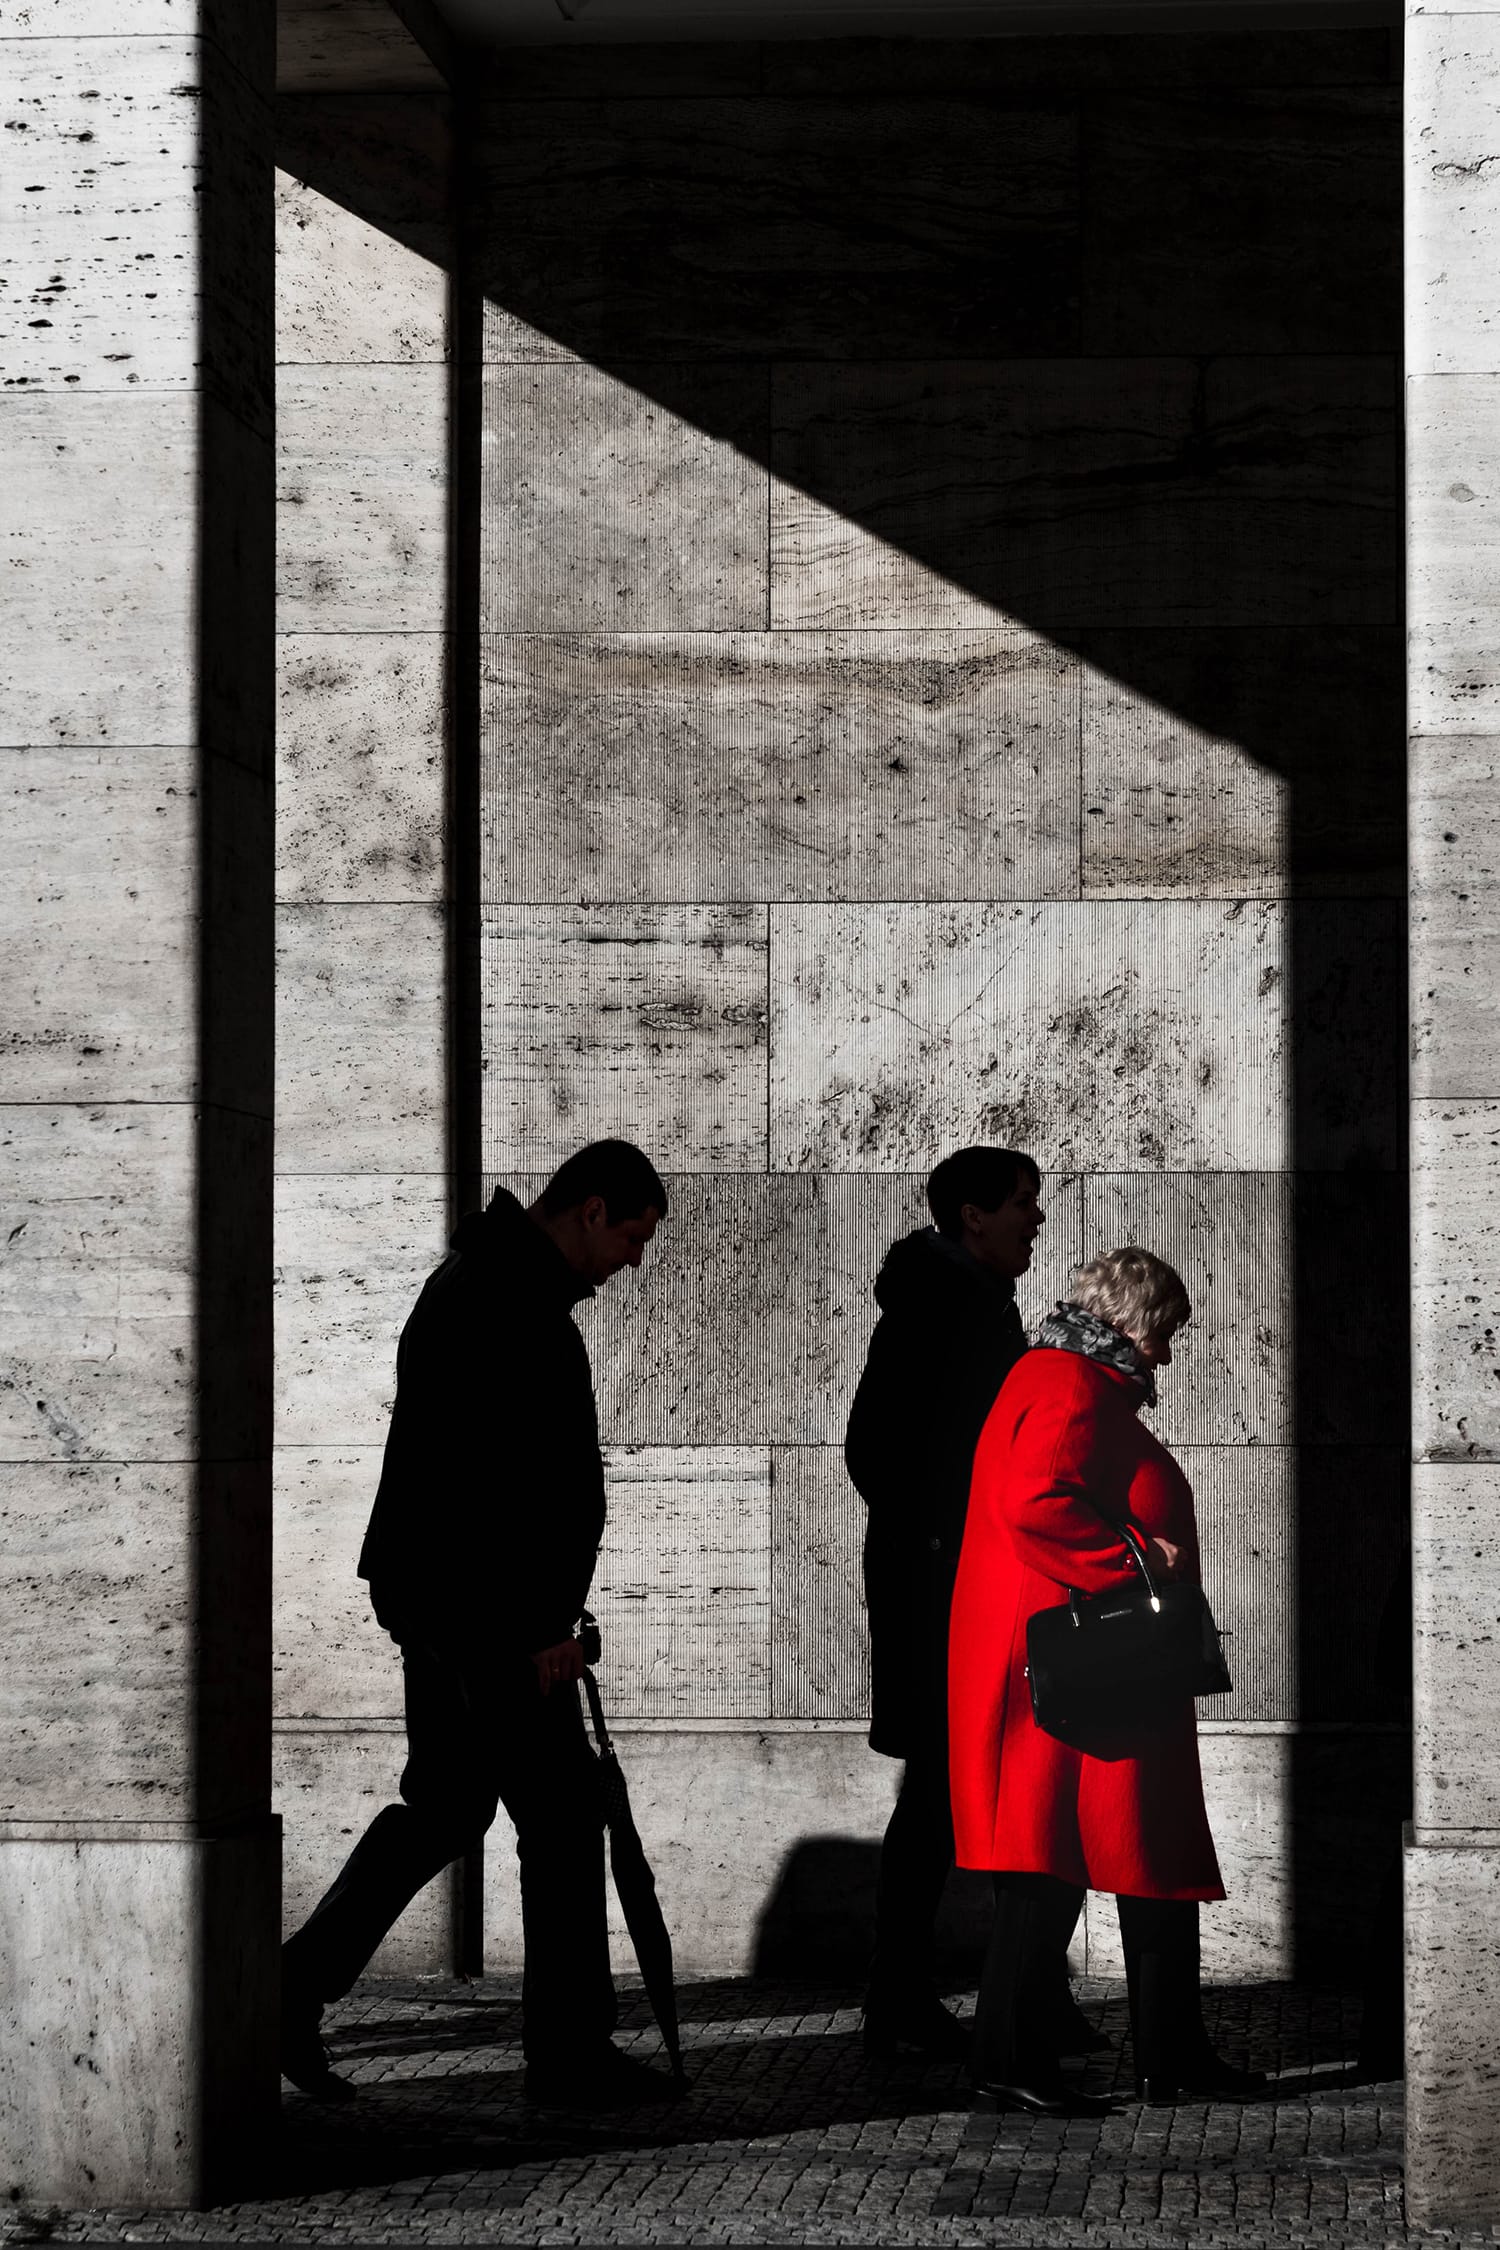 Street Photography: 18 Awesome Tips For Shooting Great Images in the City